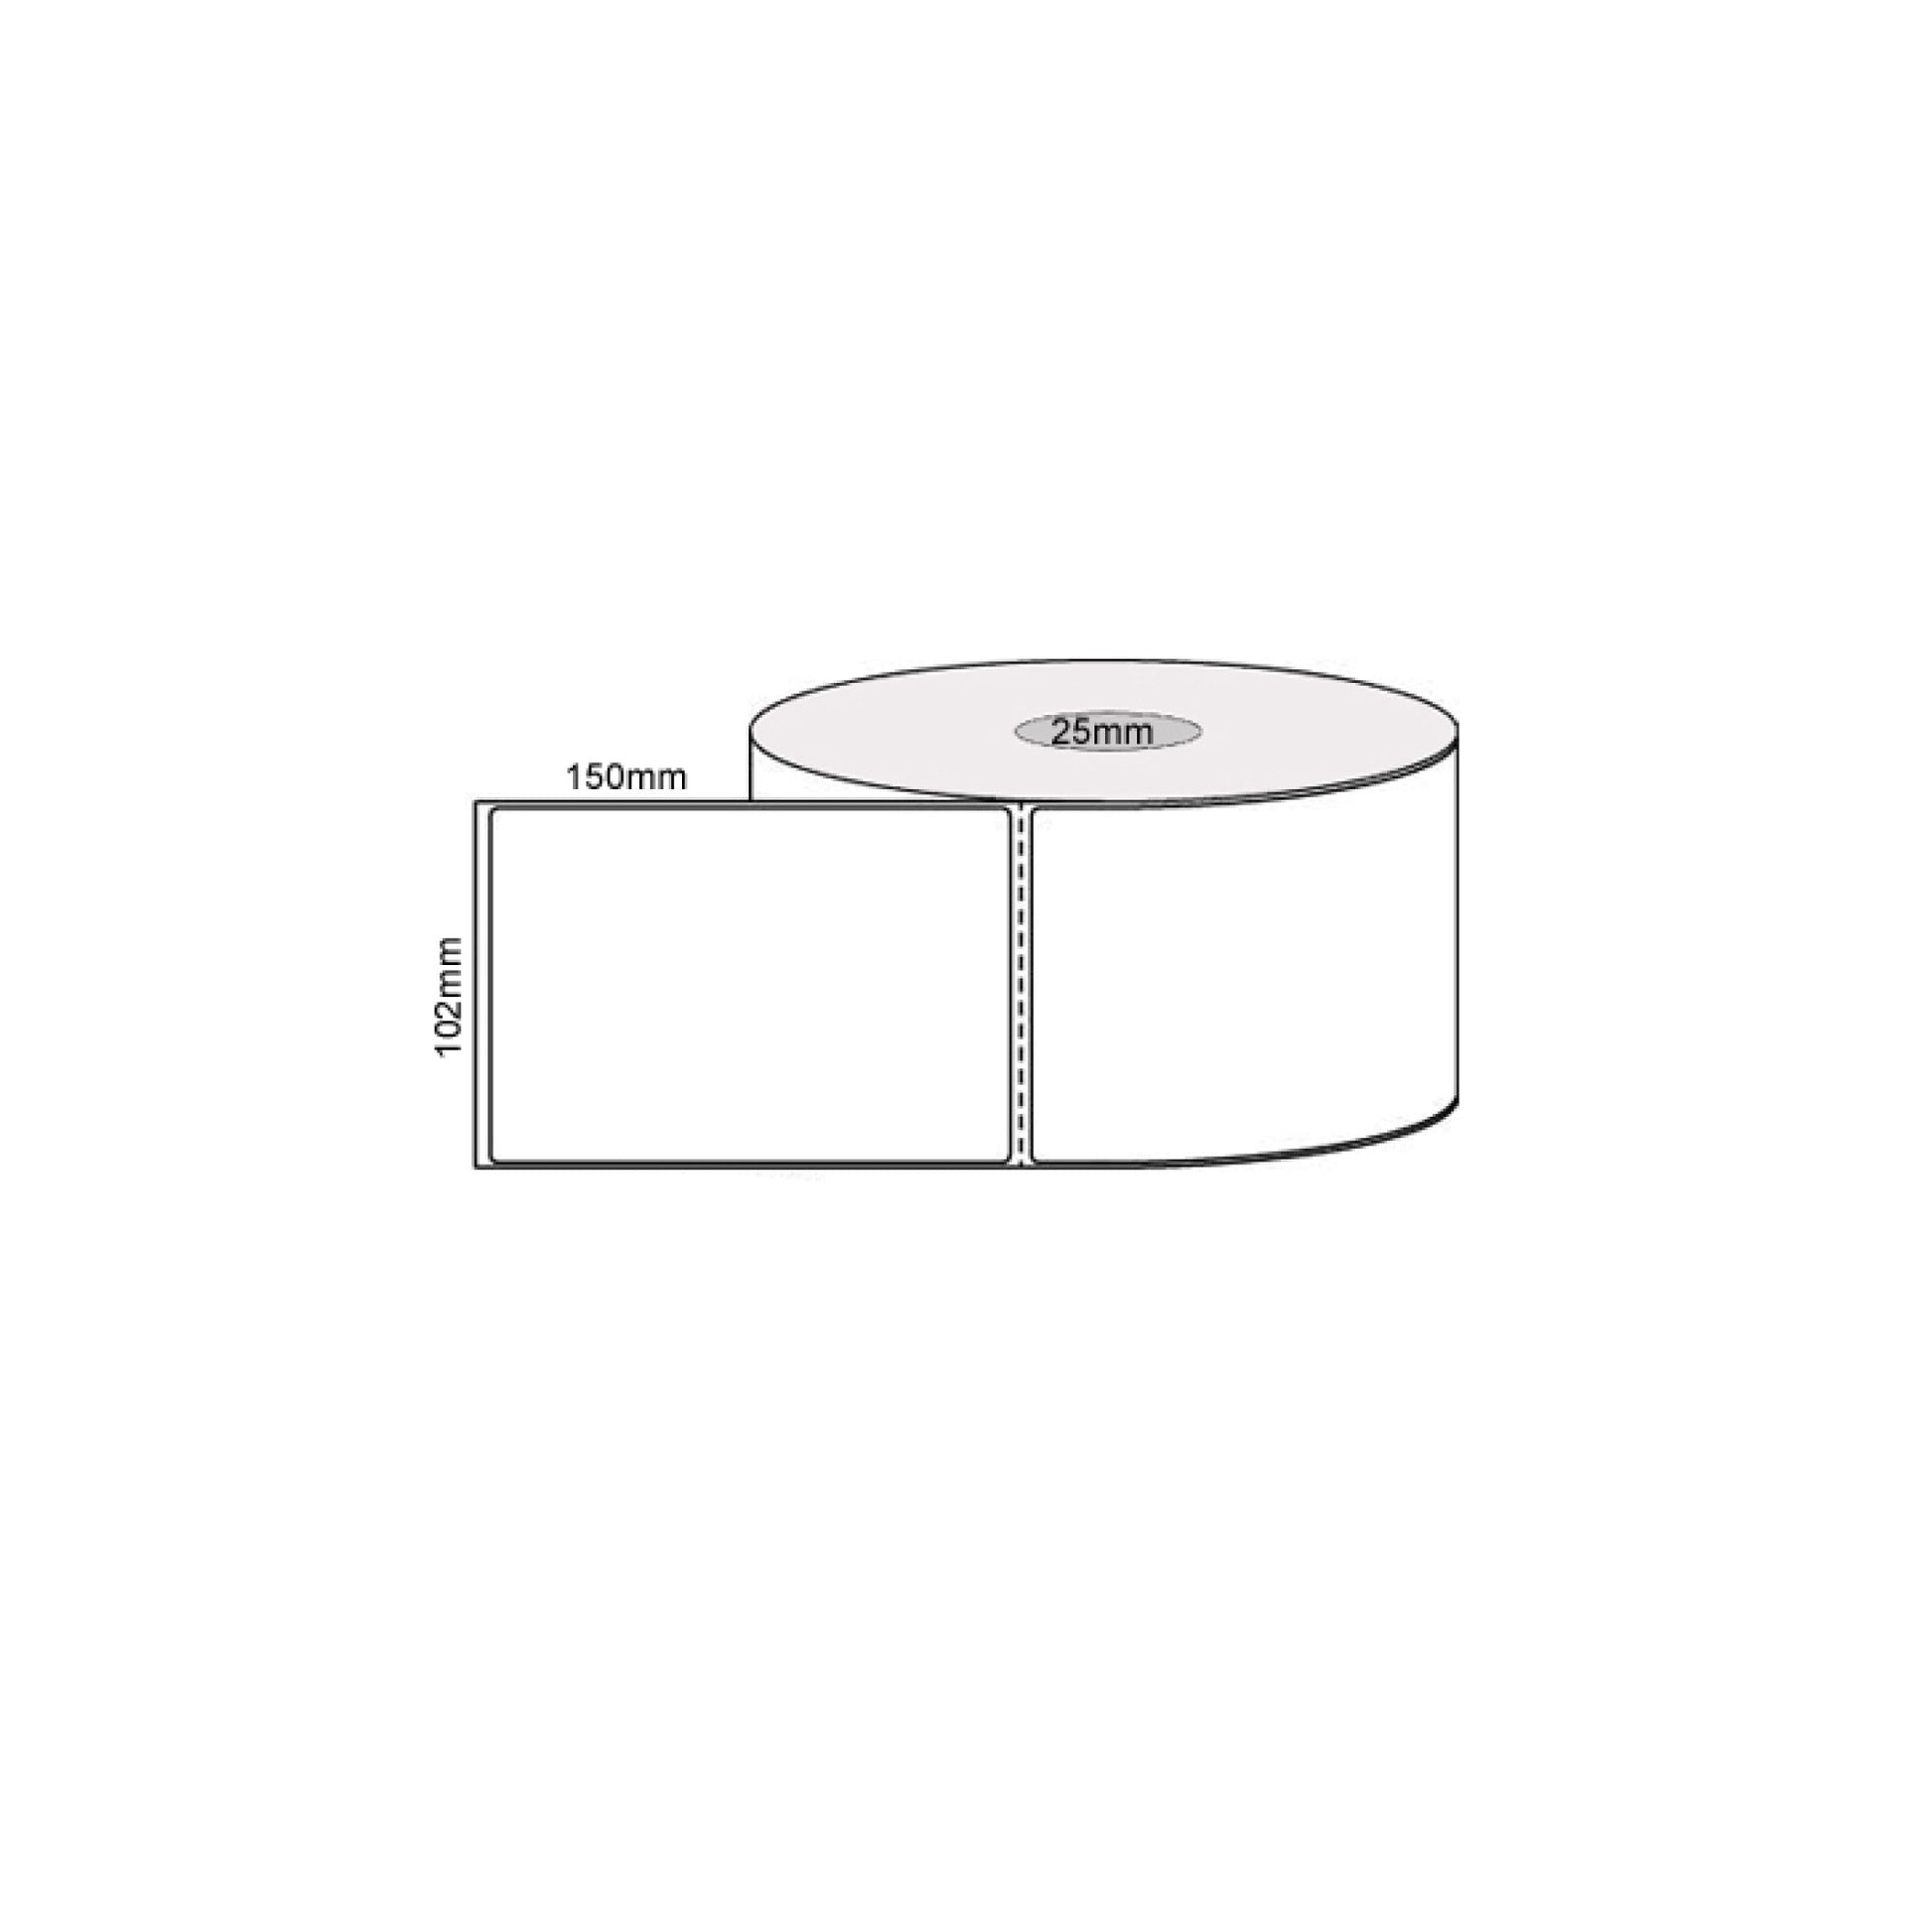 1 Roll x 400 Label Stickers 102x150mm - Direct Thermal White Shipping Labels